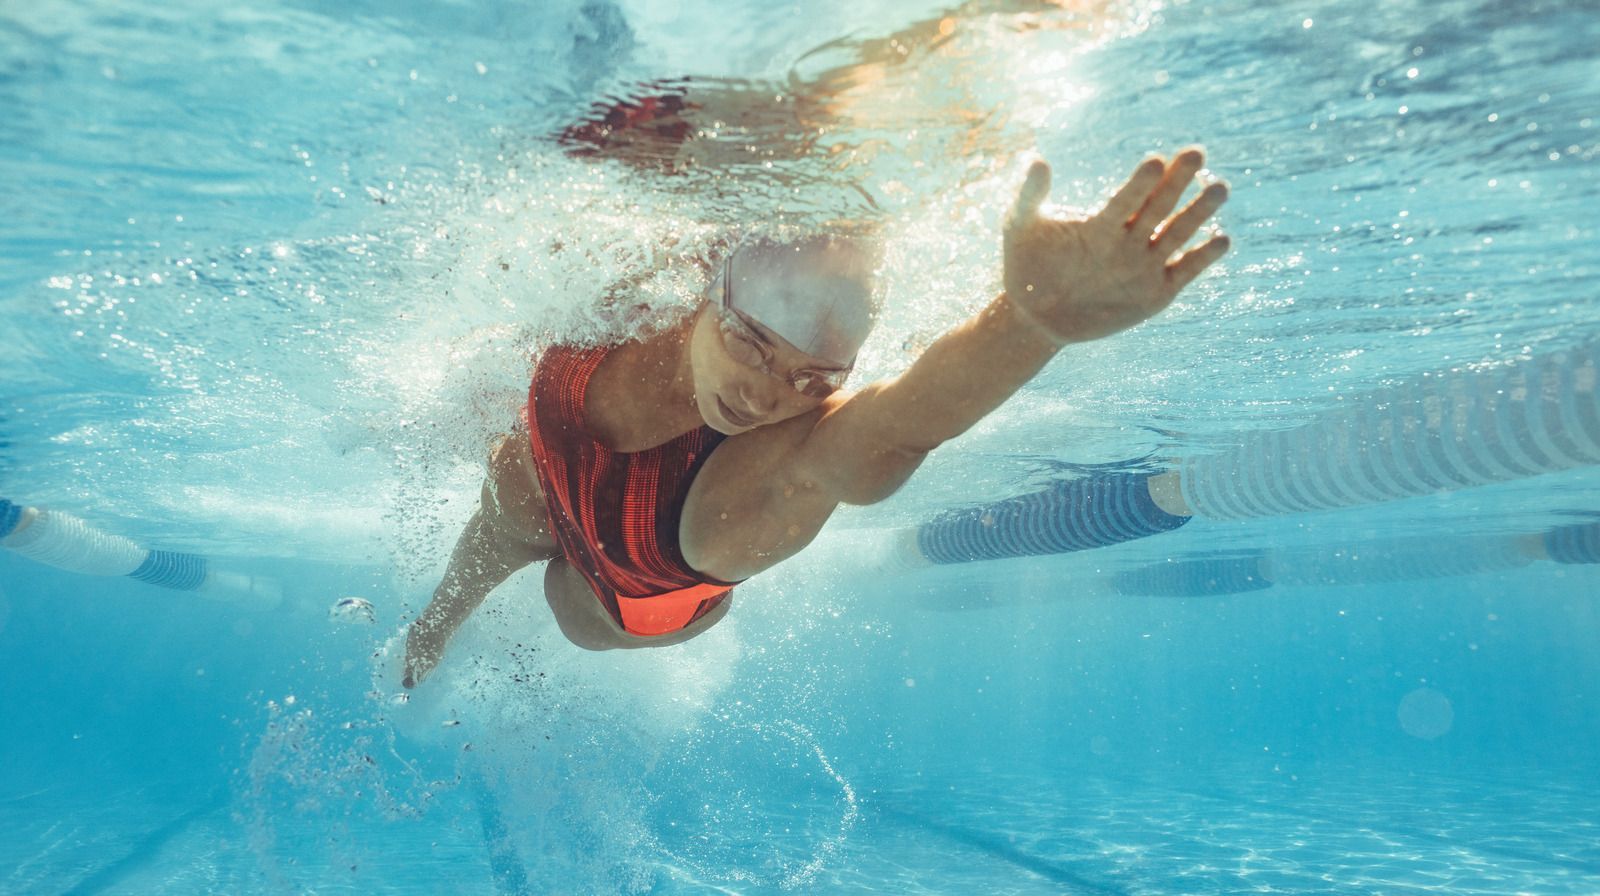 Swimmer in the pool, head down stretching forward in a front crawl